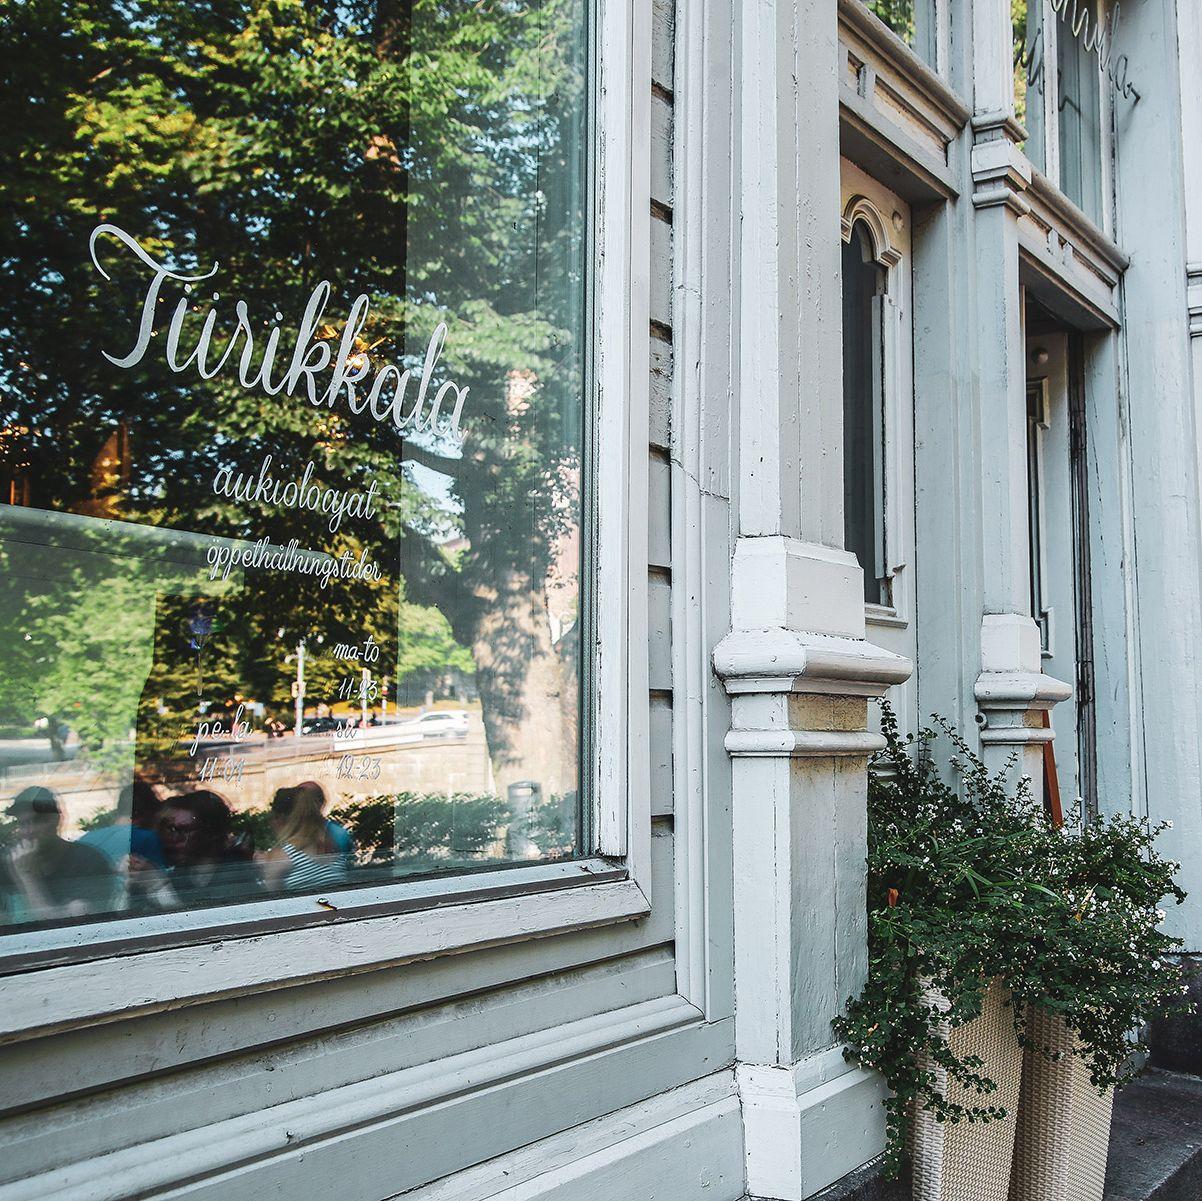 The white exterior of Tiirikkala, featuring a window with the name of the restaurant in elegant script.